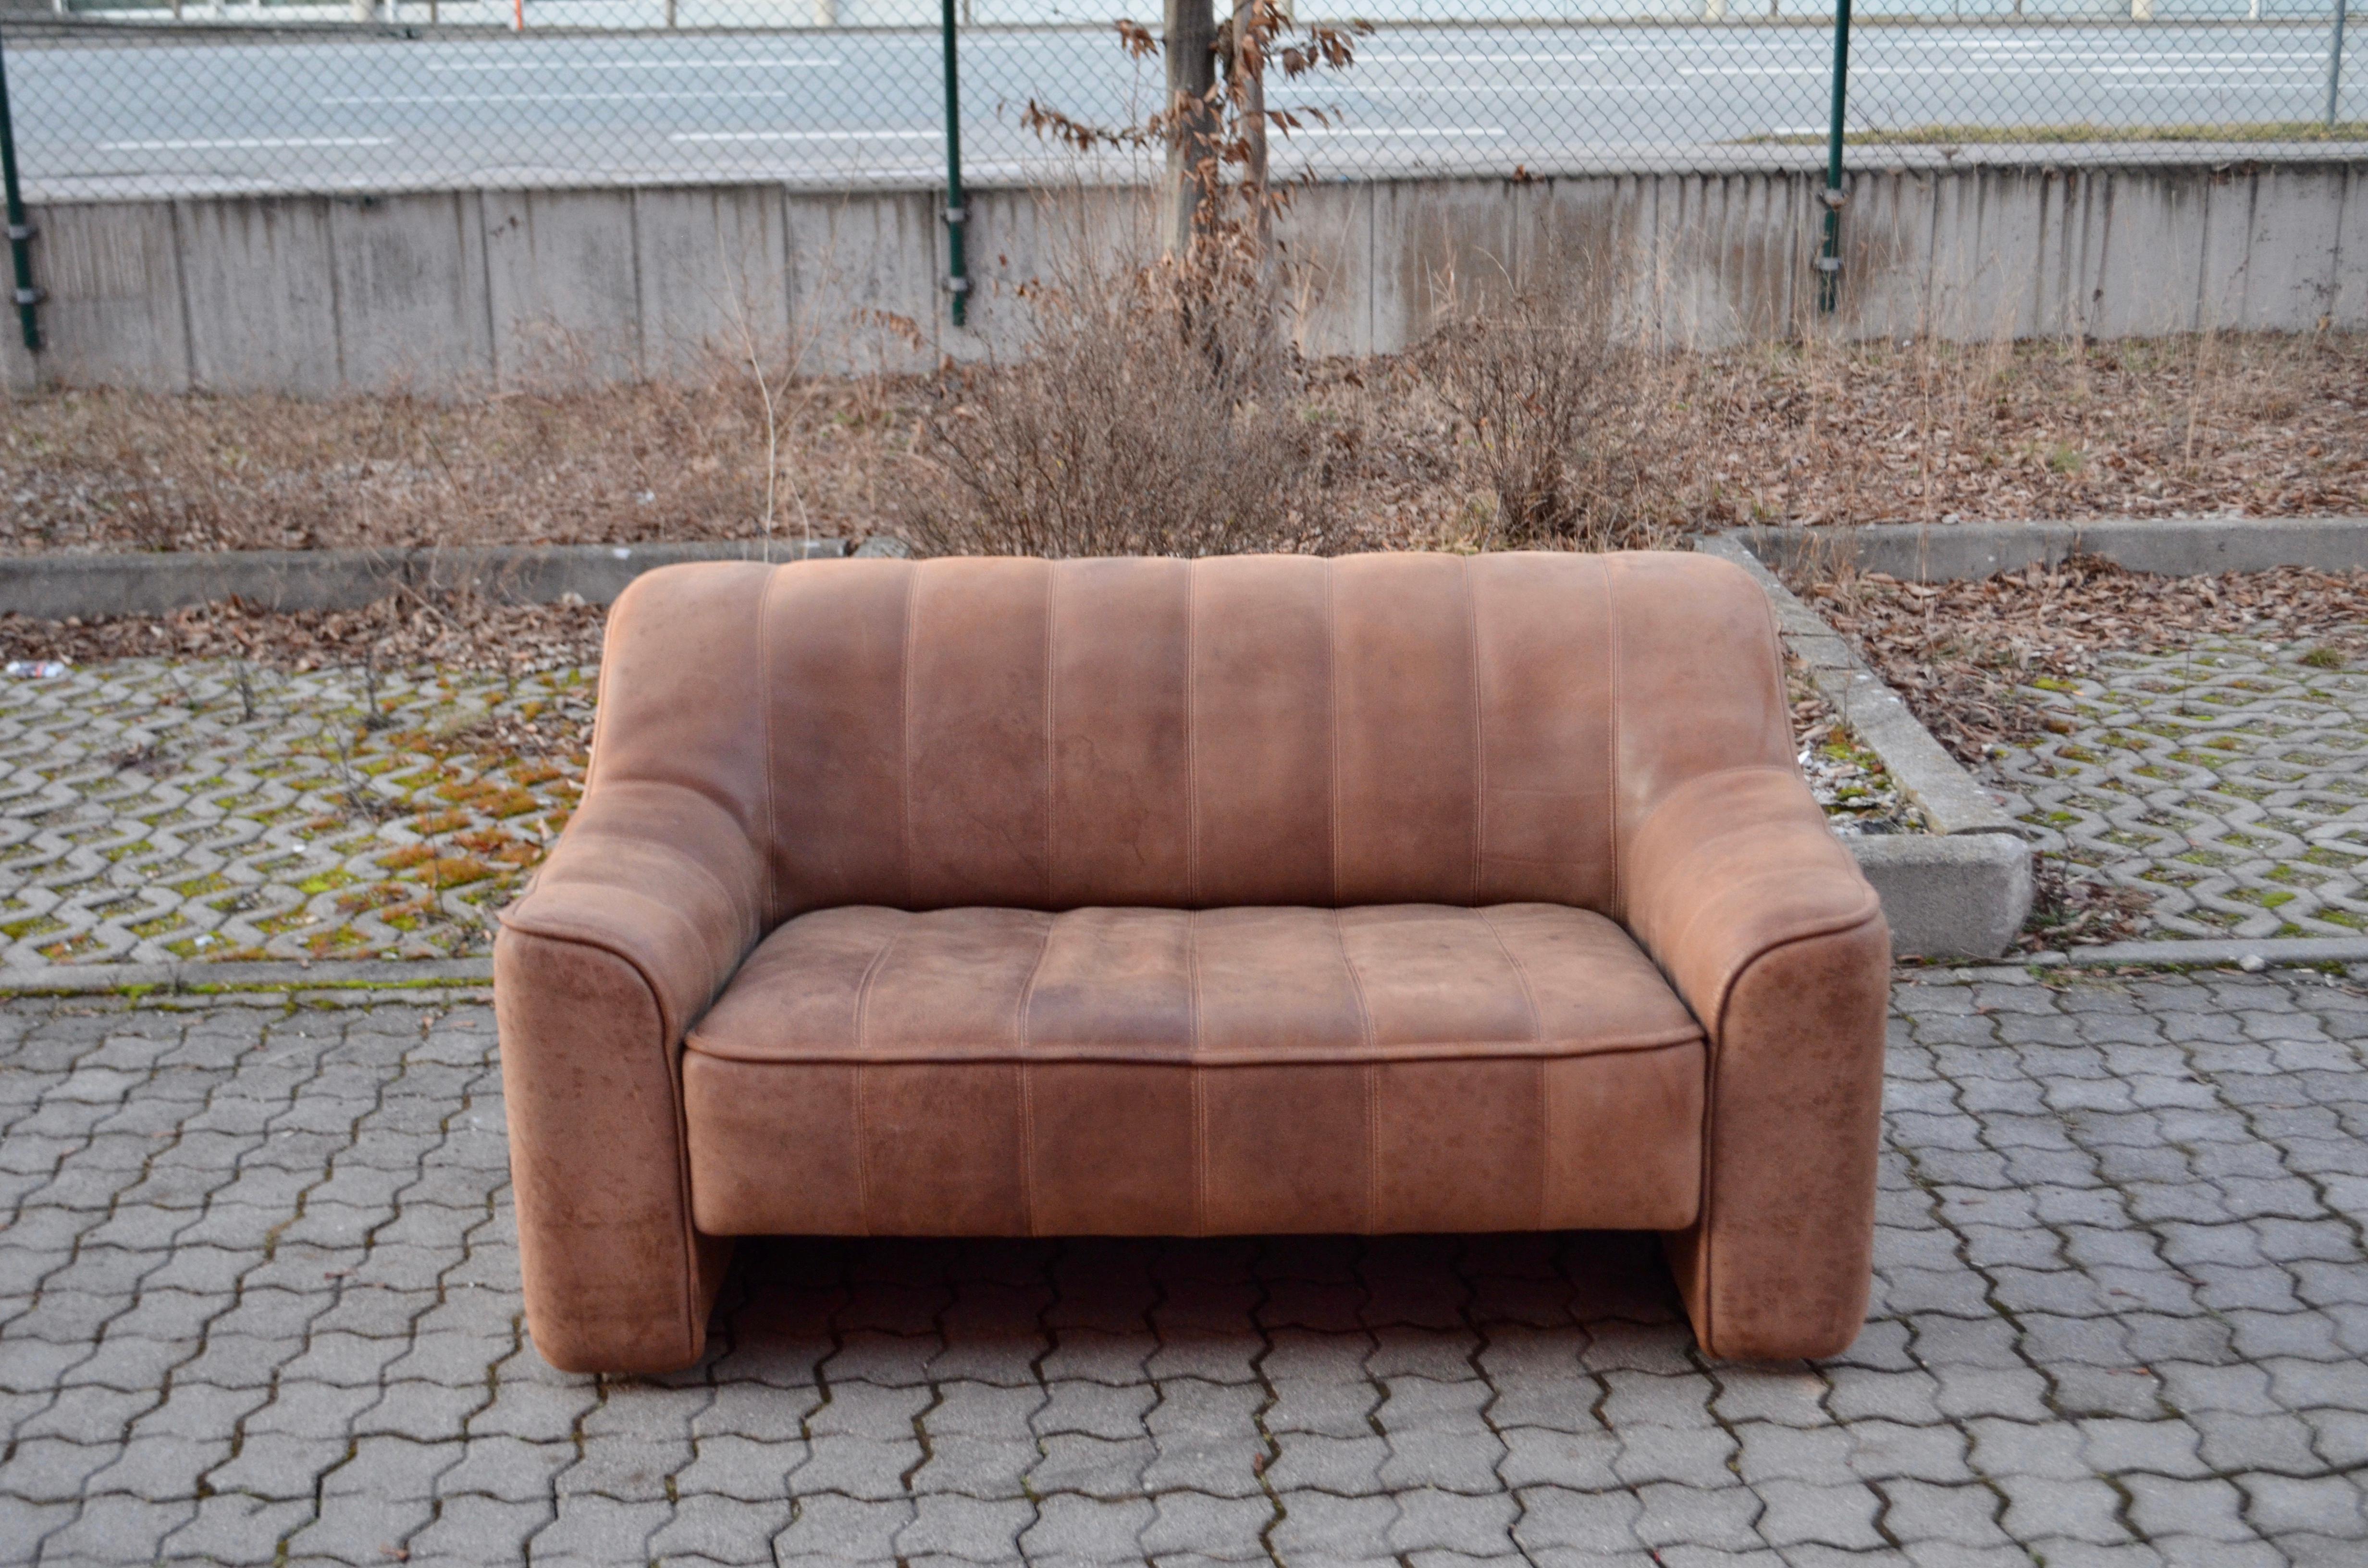 De Sede DS 44 / 02 neck leather sofa.
It´s the small loveseat Sofa.
This DS-44 sofa was manufactured in Switzerland by De Sede and is upholstered in 3-5 mm thick, natural hide.
The leather color is natural brown
and has some patina on the